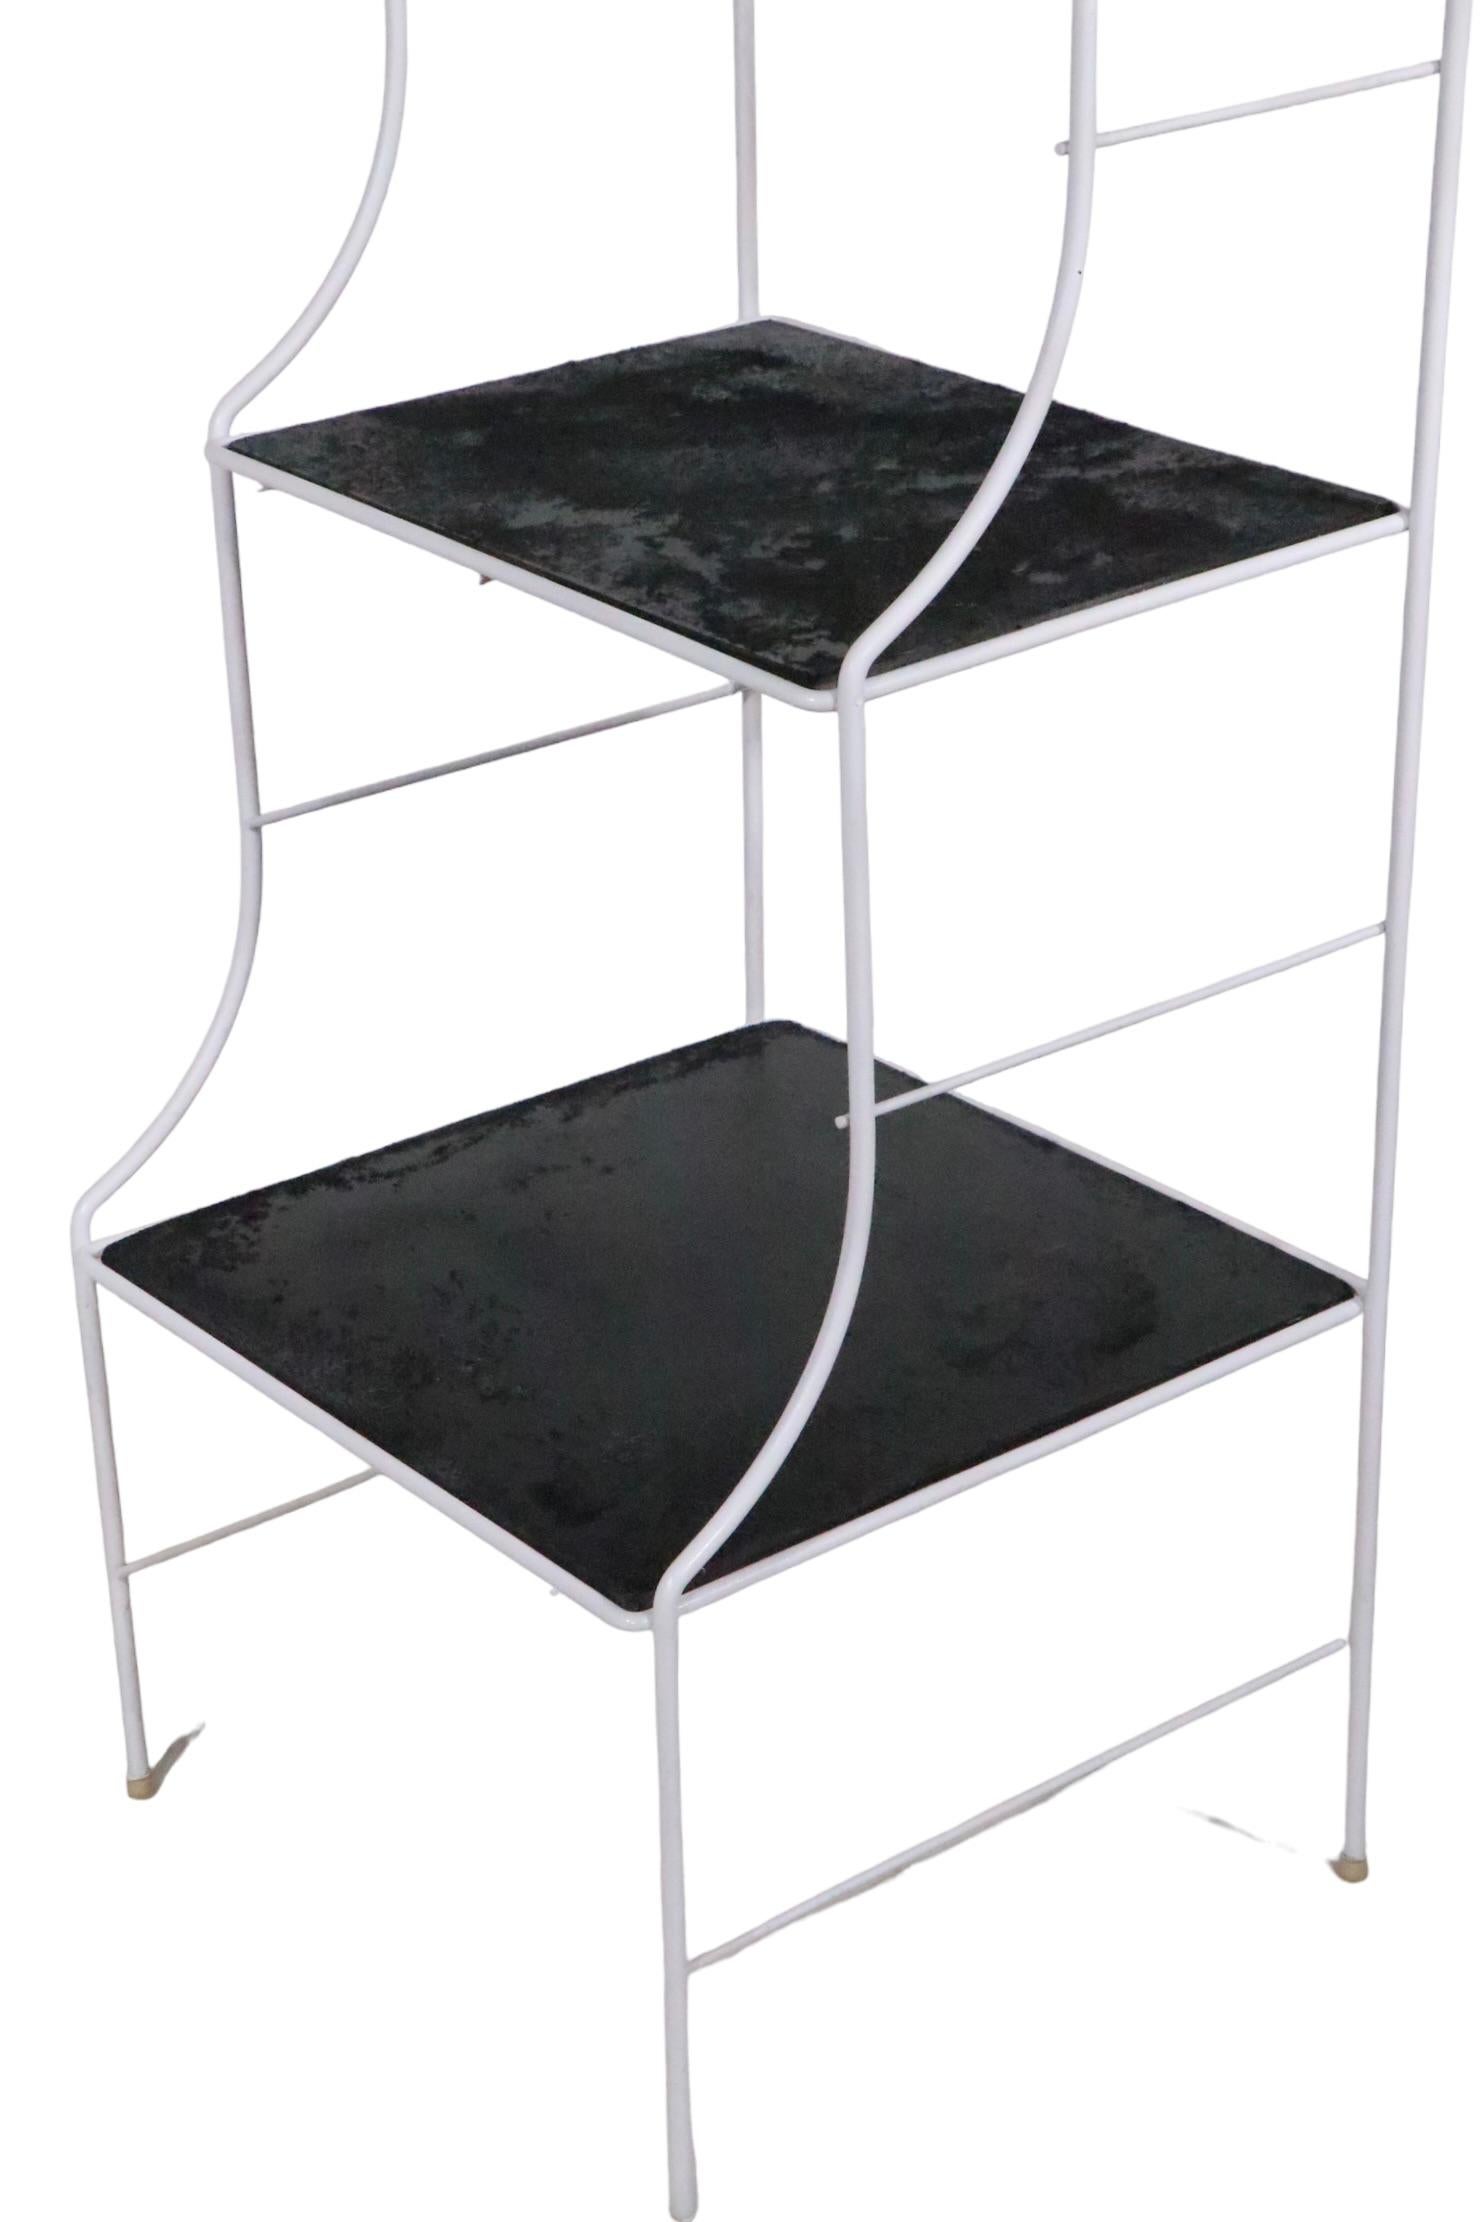 Hollywood Regency Wrought Iron  Three Tier Shelf c. 1950's For Sale 5